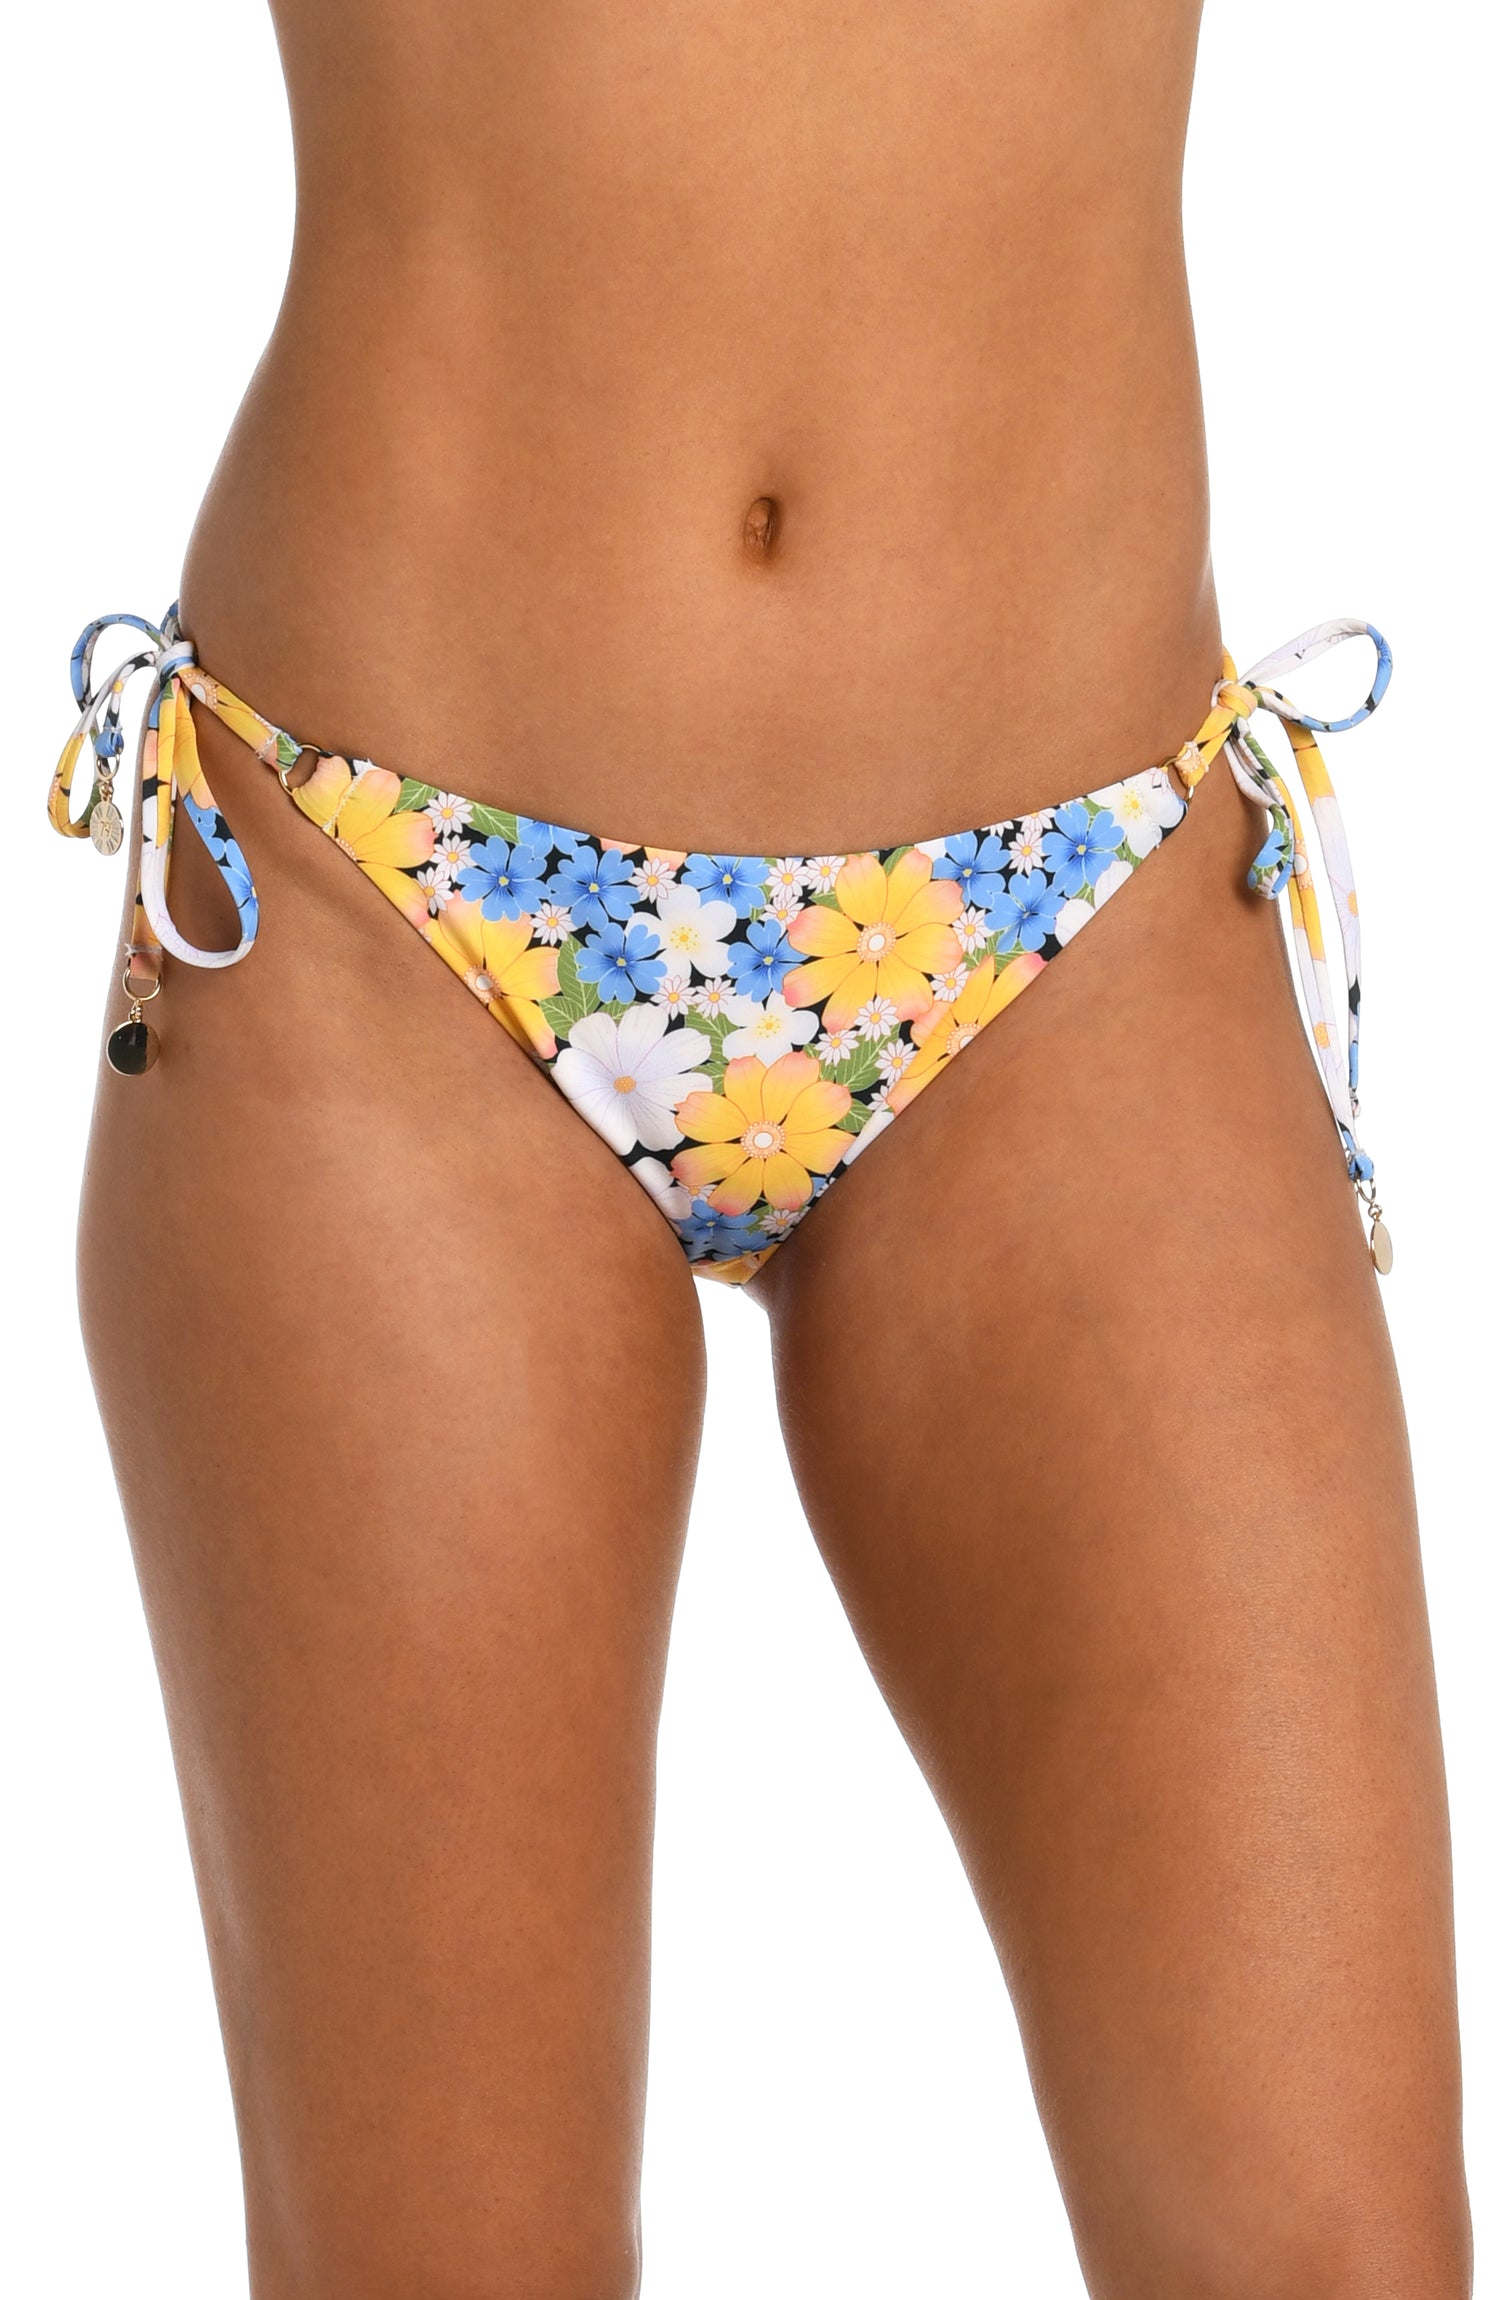 Model is wearing a multicolored daisy printed side tie hipster bikini bottom from our Daisy Daze collection.